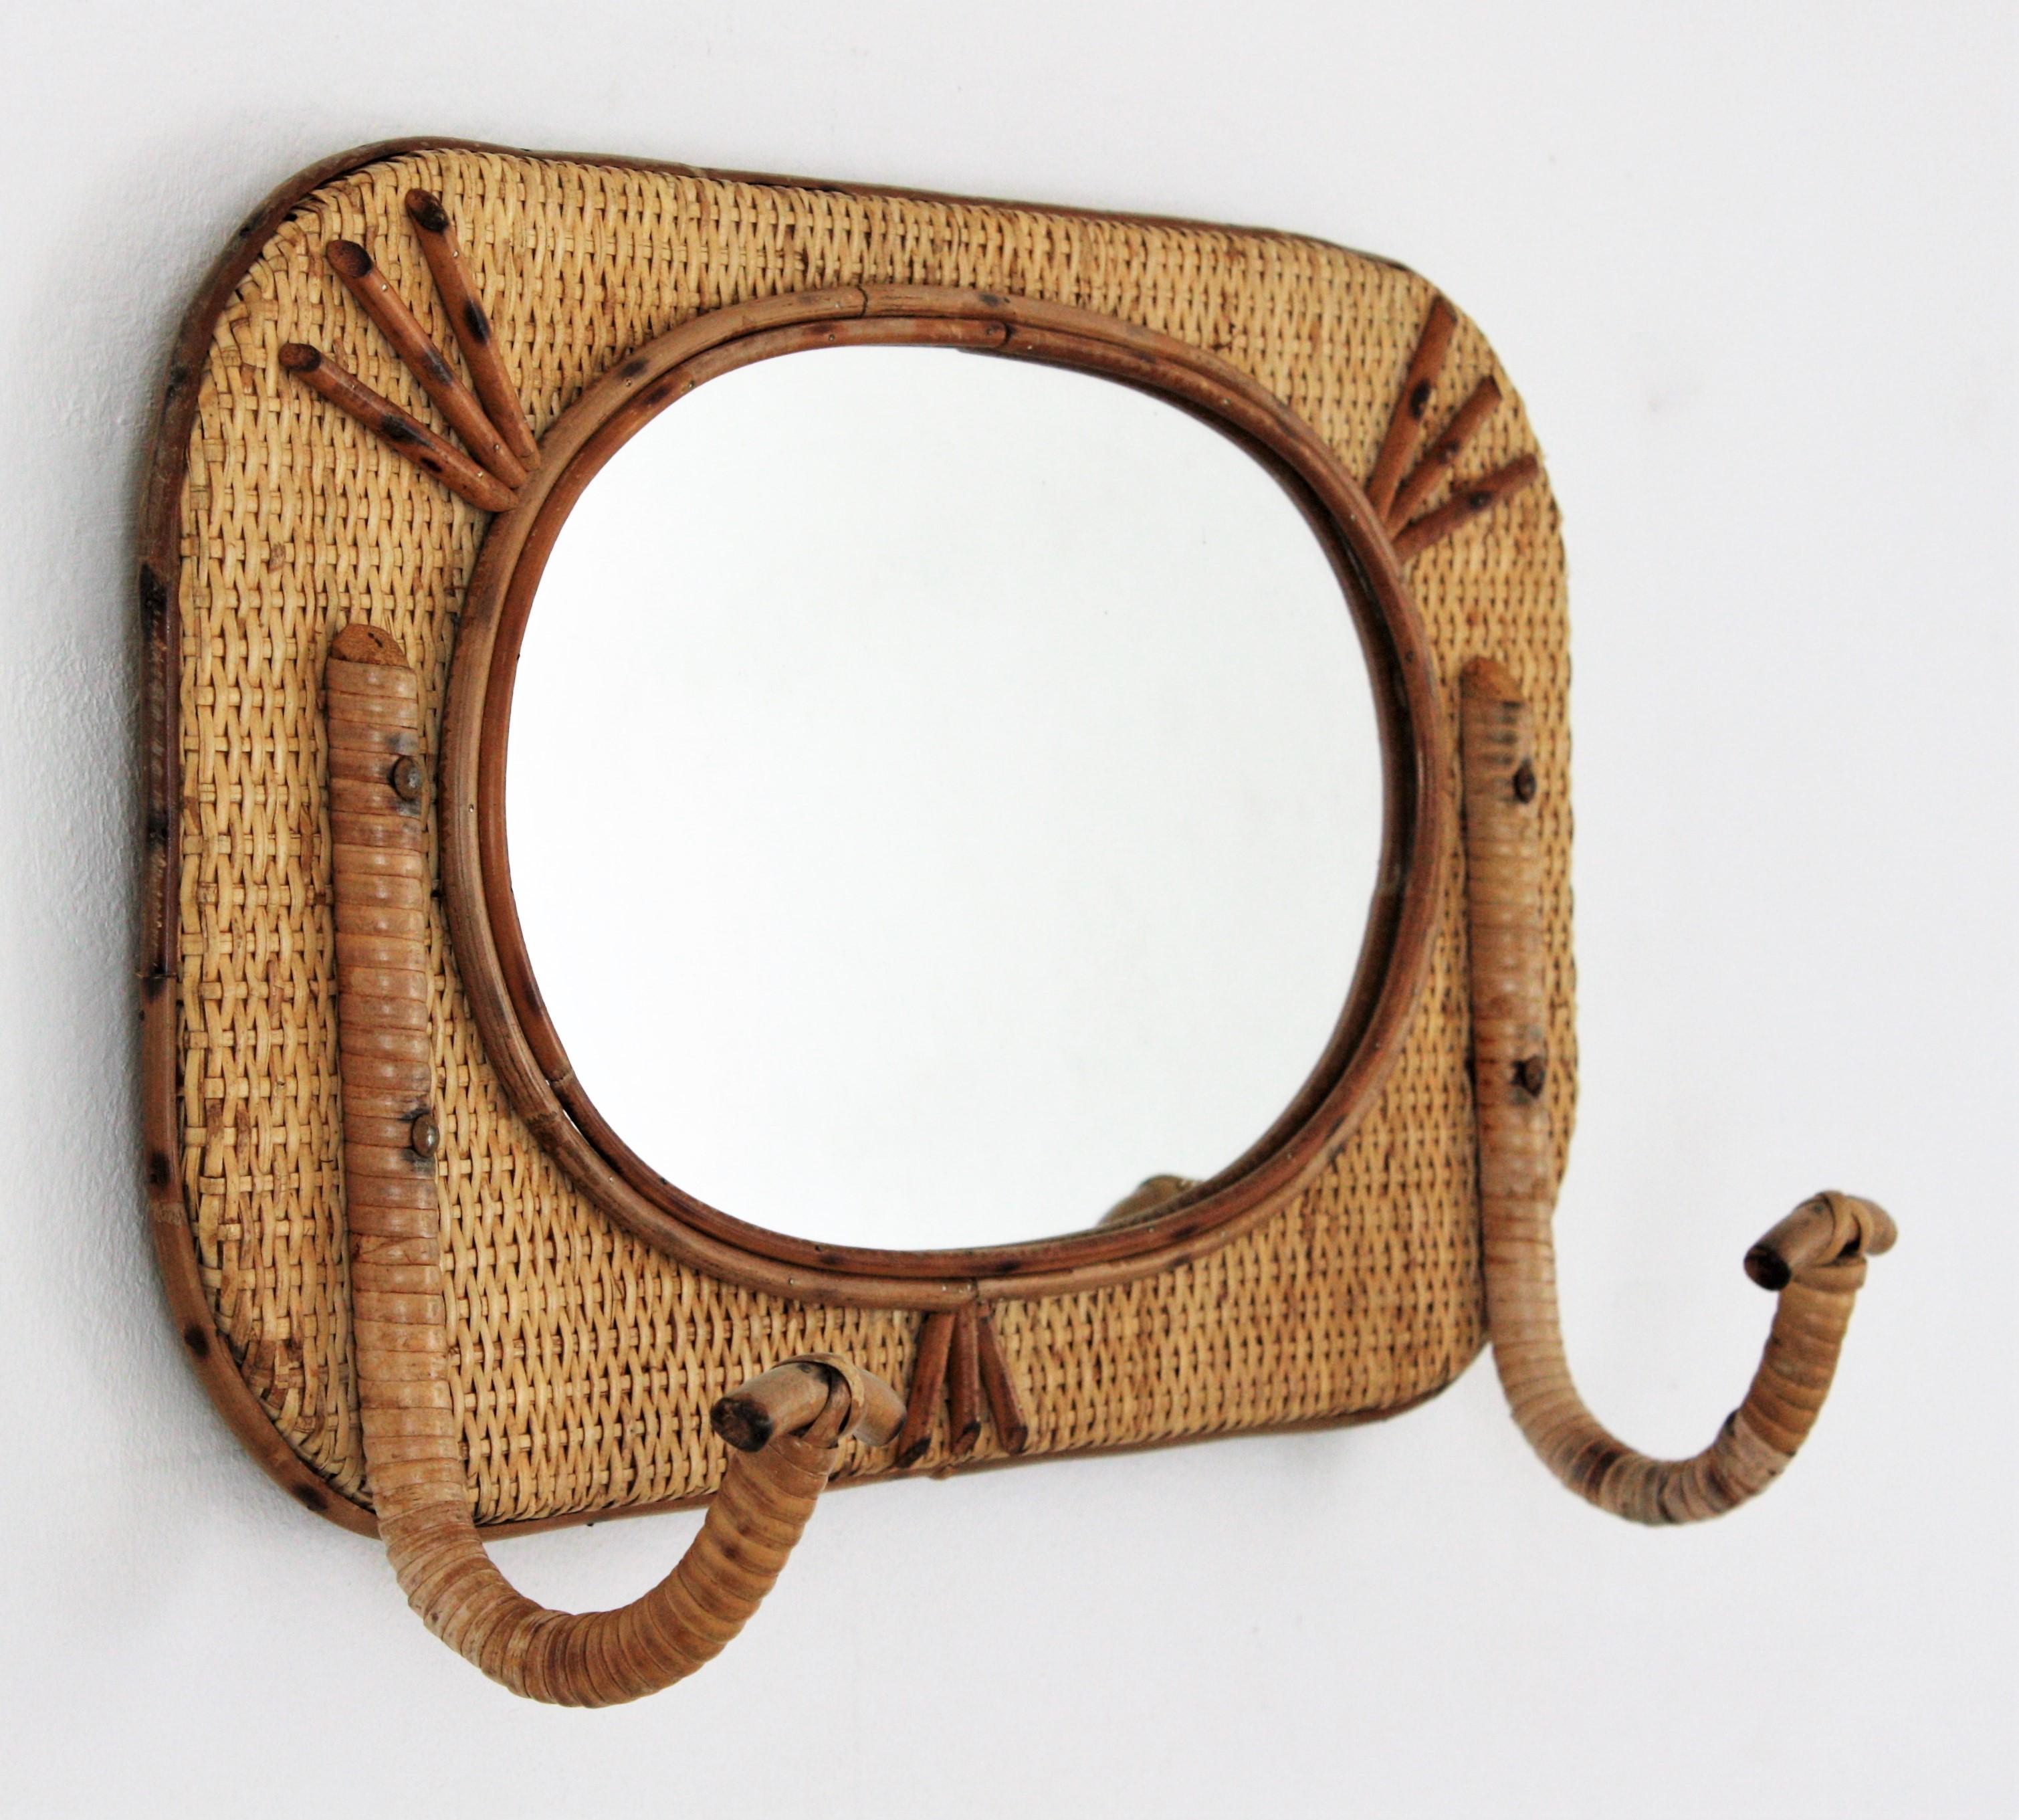 Spanish Bamboo and Rattan Wall Coat Hanger Rack with Mirror, Spain, 1960s